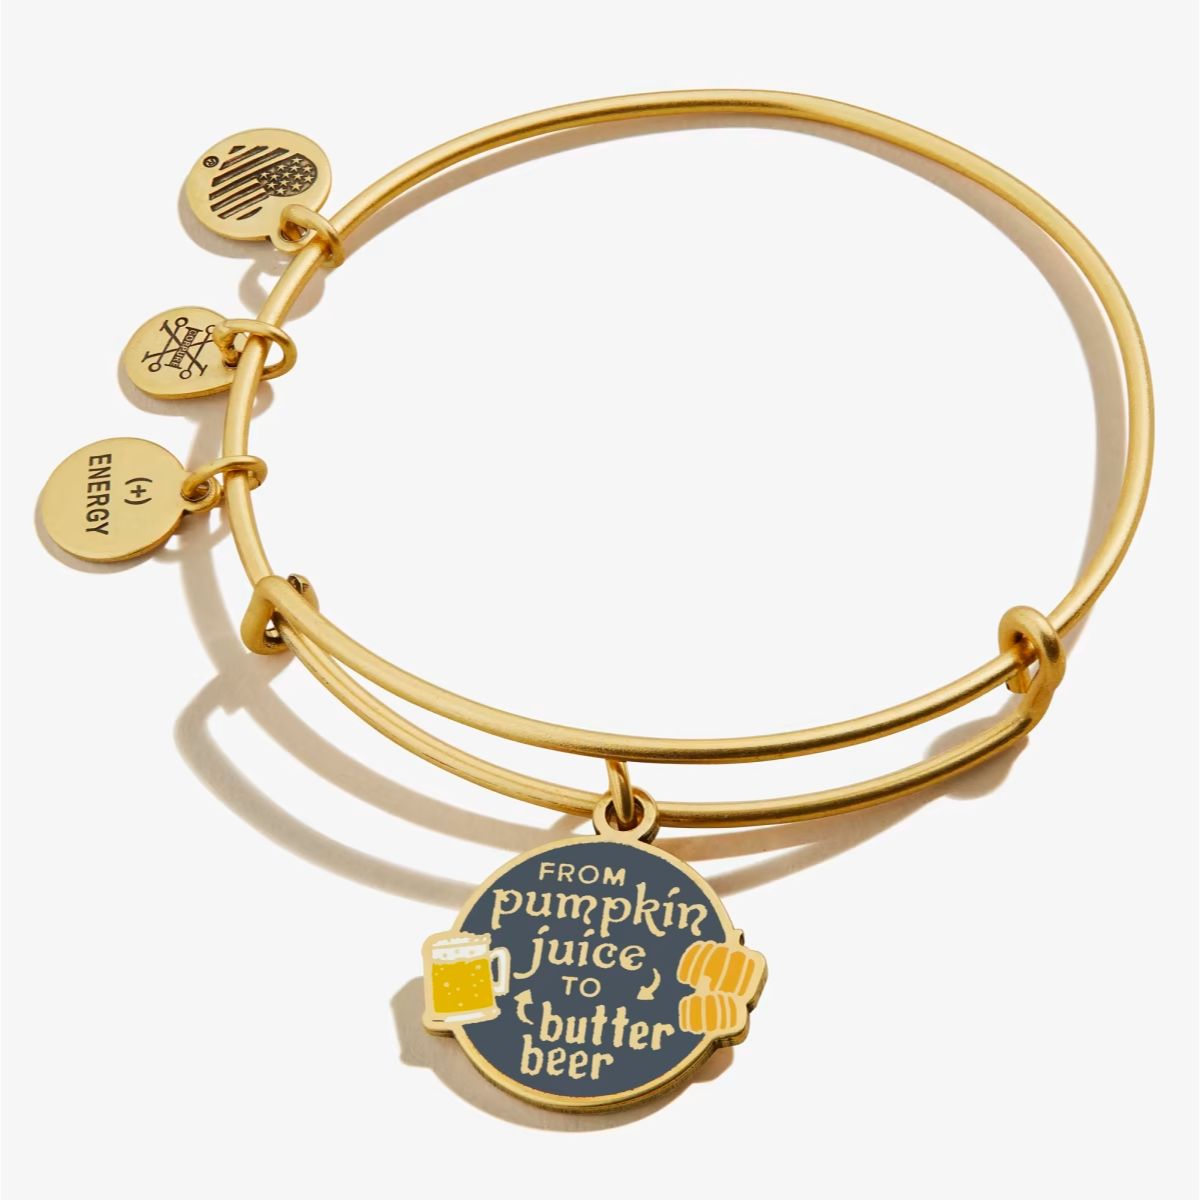 Alex + Ani Harry Potter 'From Pumpkin Juice To Butter Beer' Charm Bangle